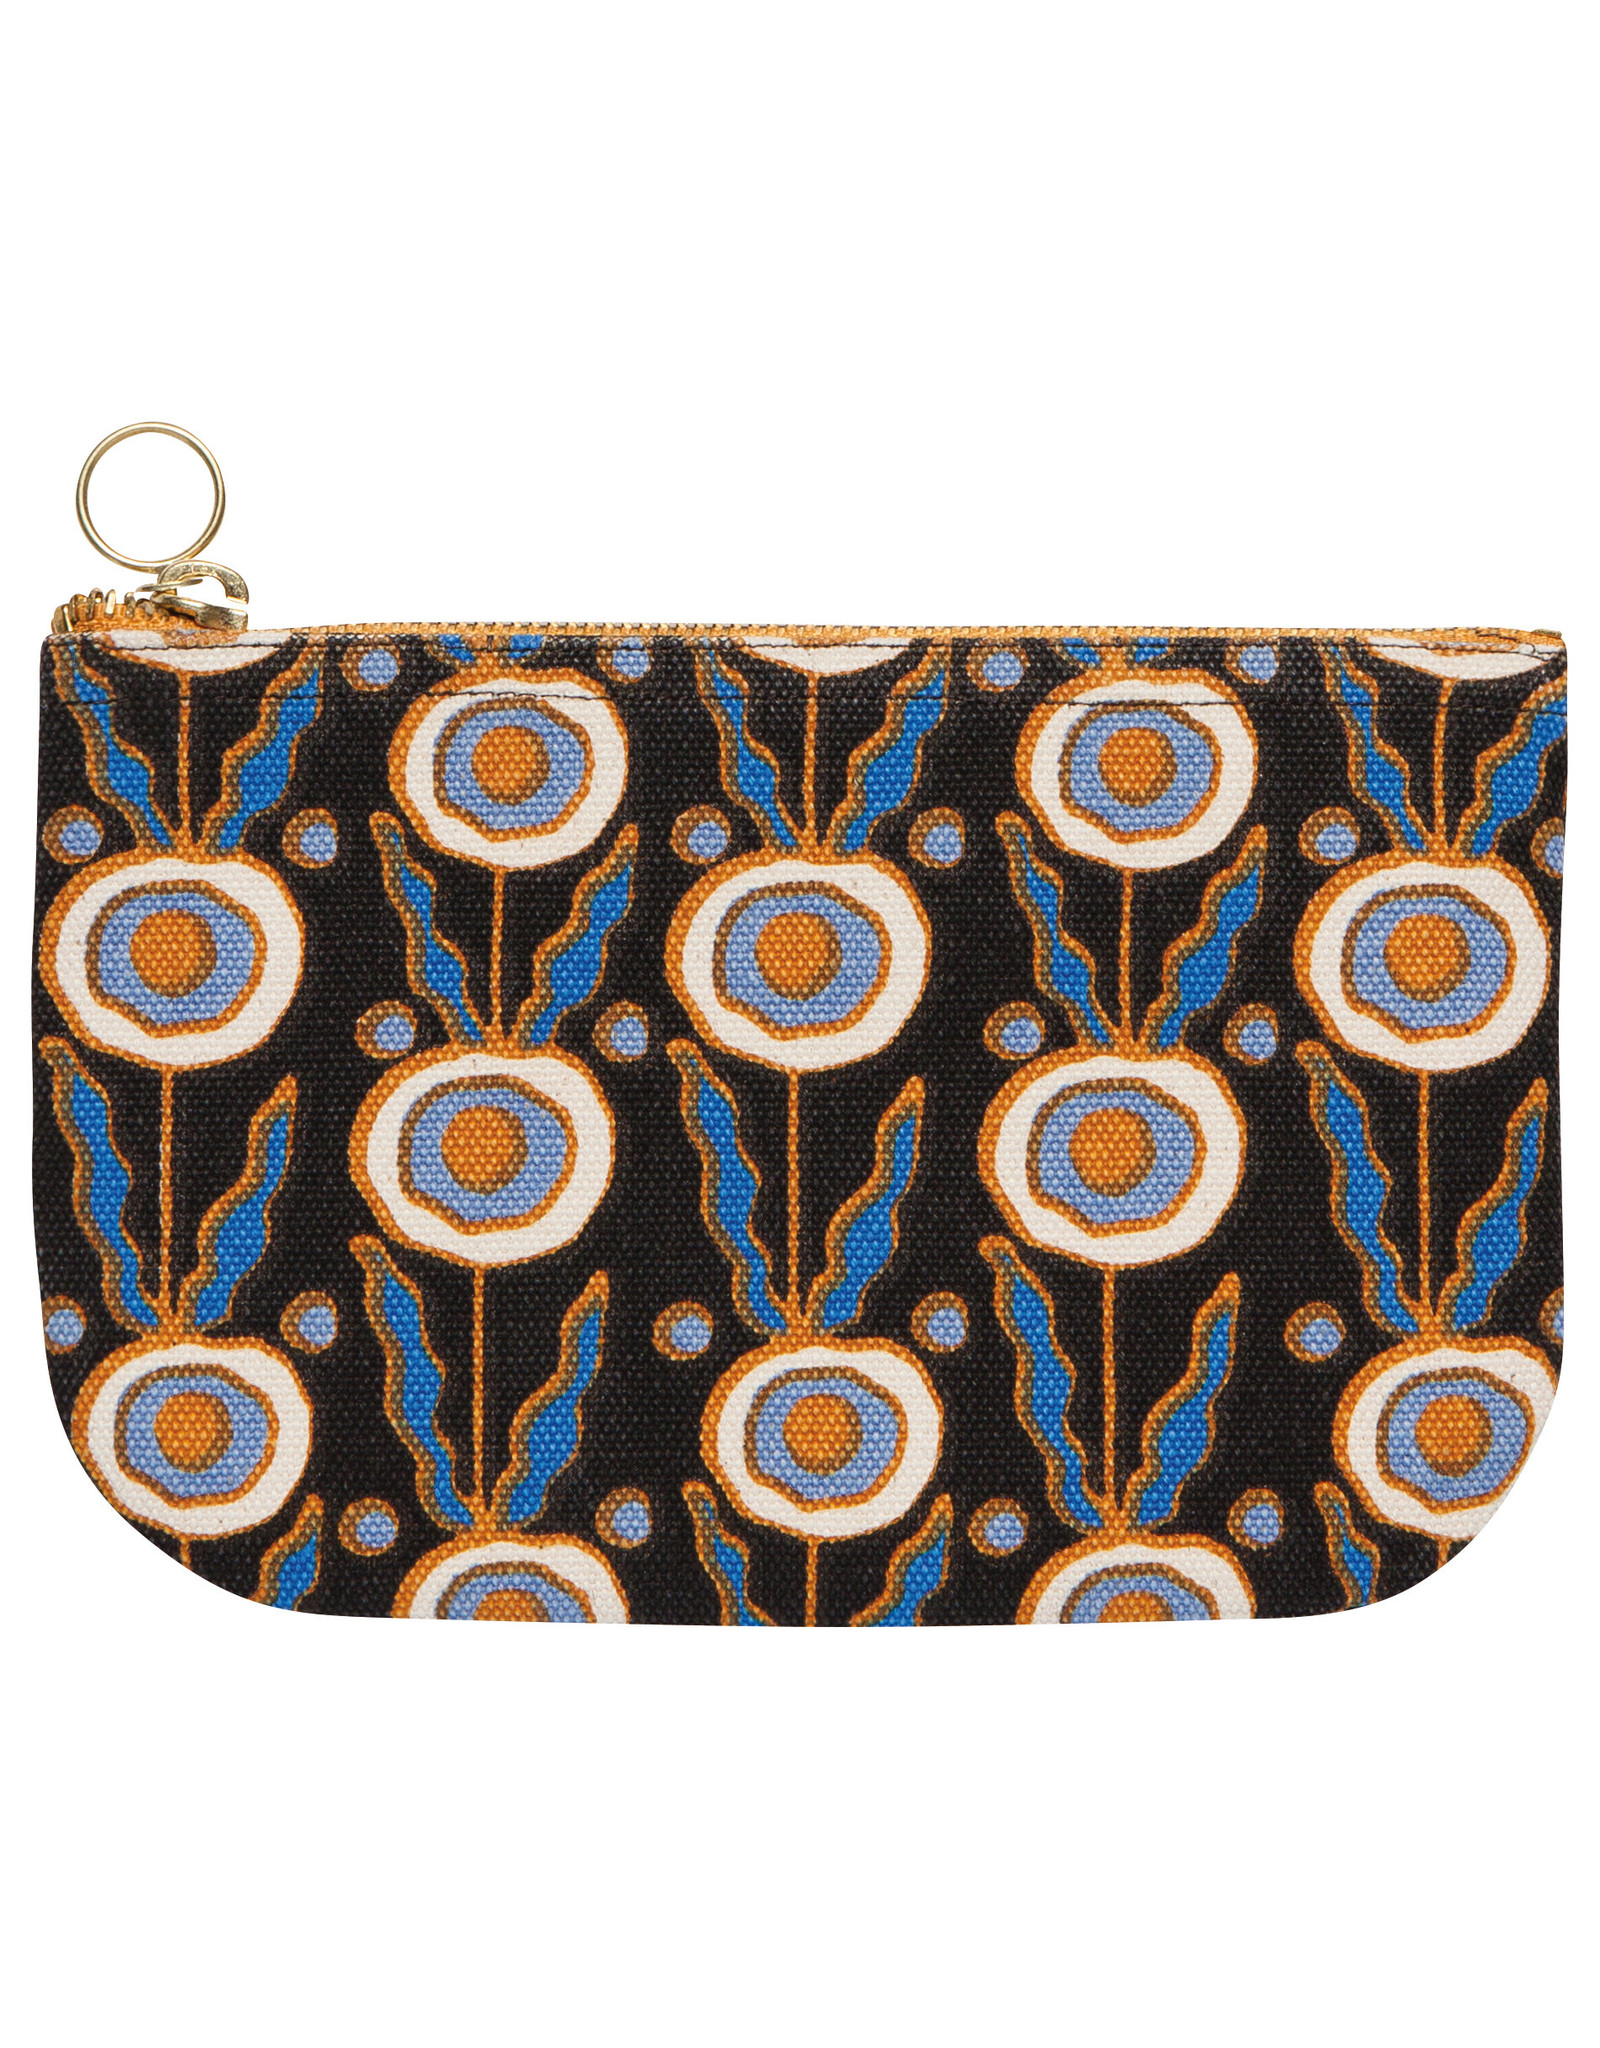 Still Life Zip Pouch - Small